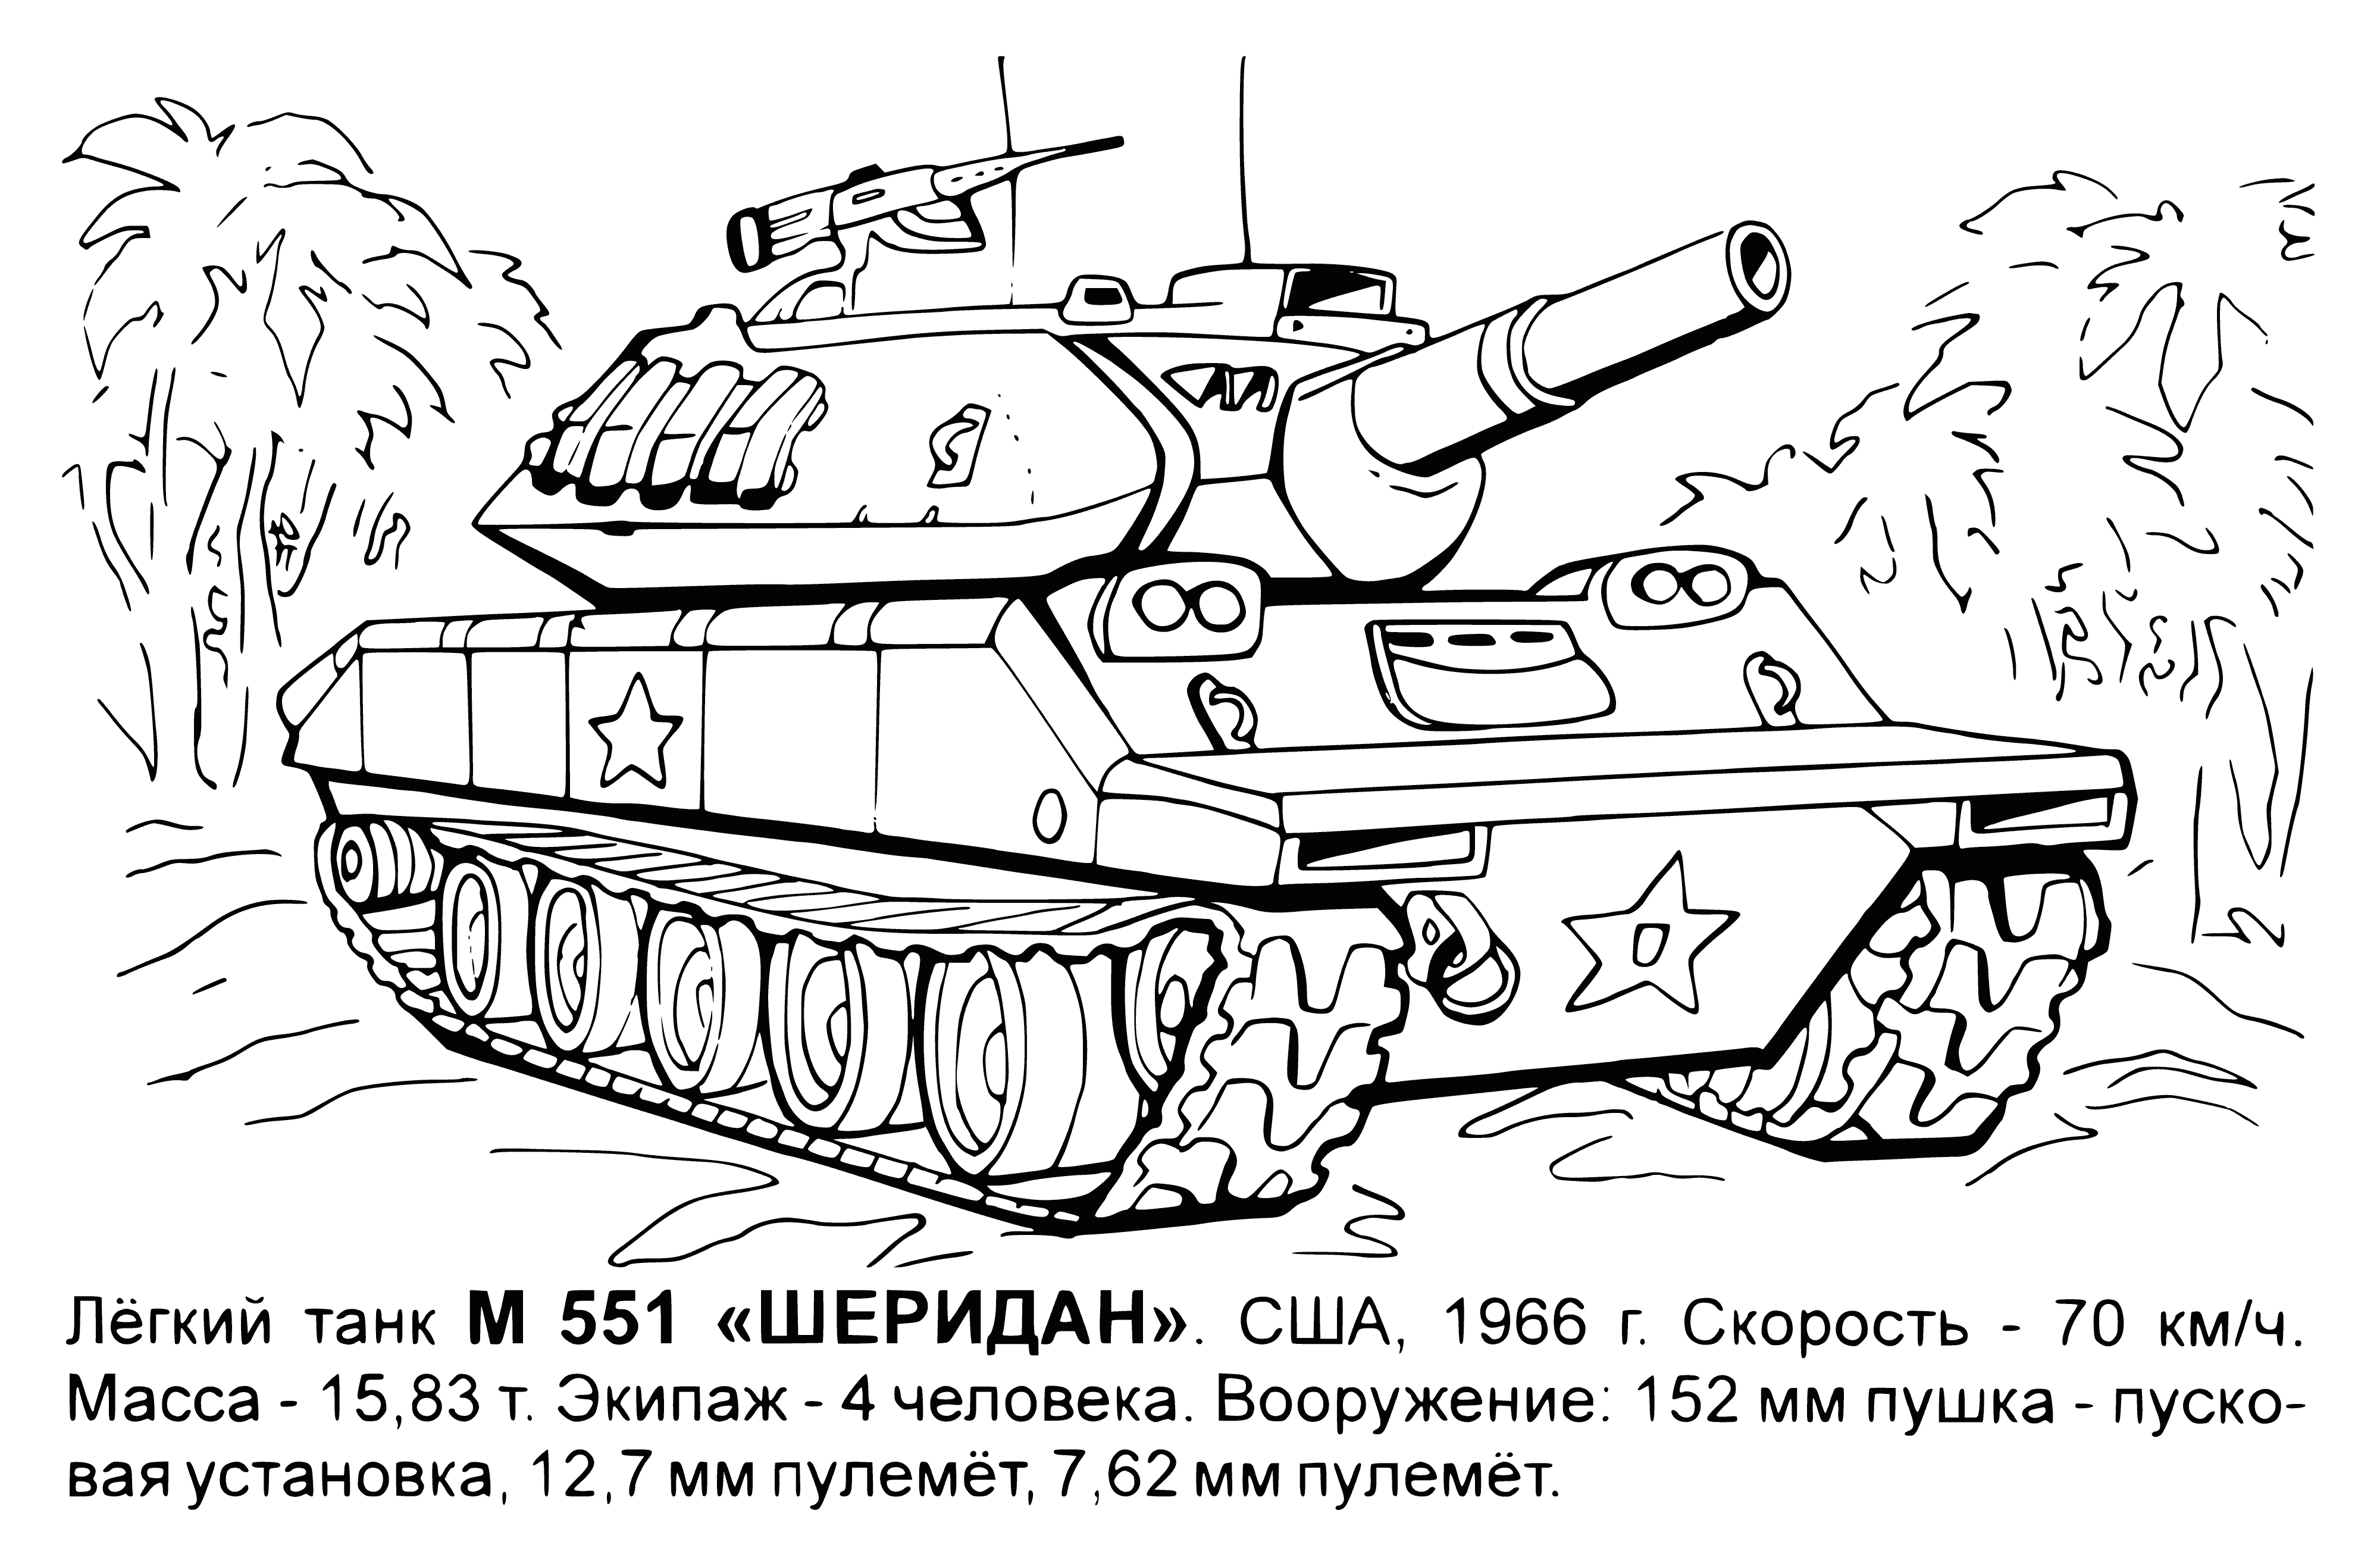 coloring page: 3 light tanks: gray (2 large), 1 green (small); in middle; have turret guns.